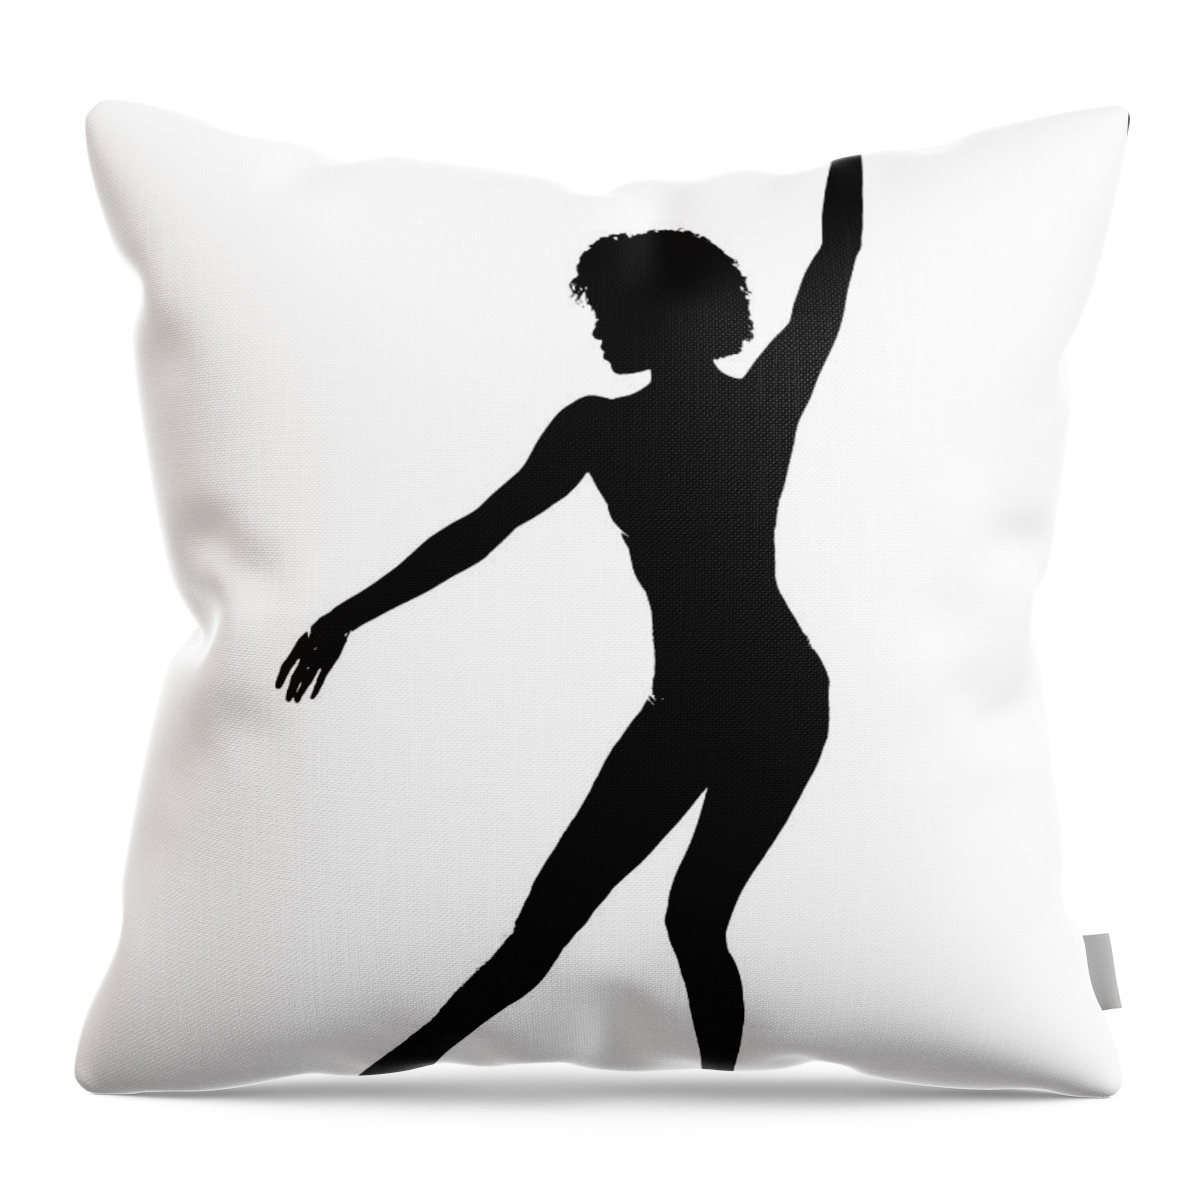 Silhouette Throw Pillow featuring the photograph Silhouette 48 by Michael Fryd